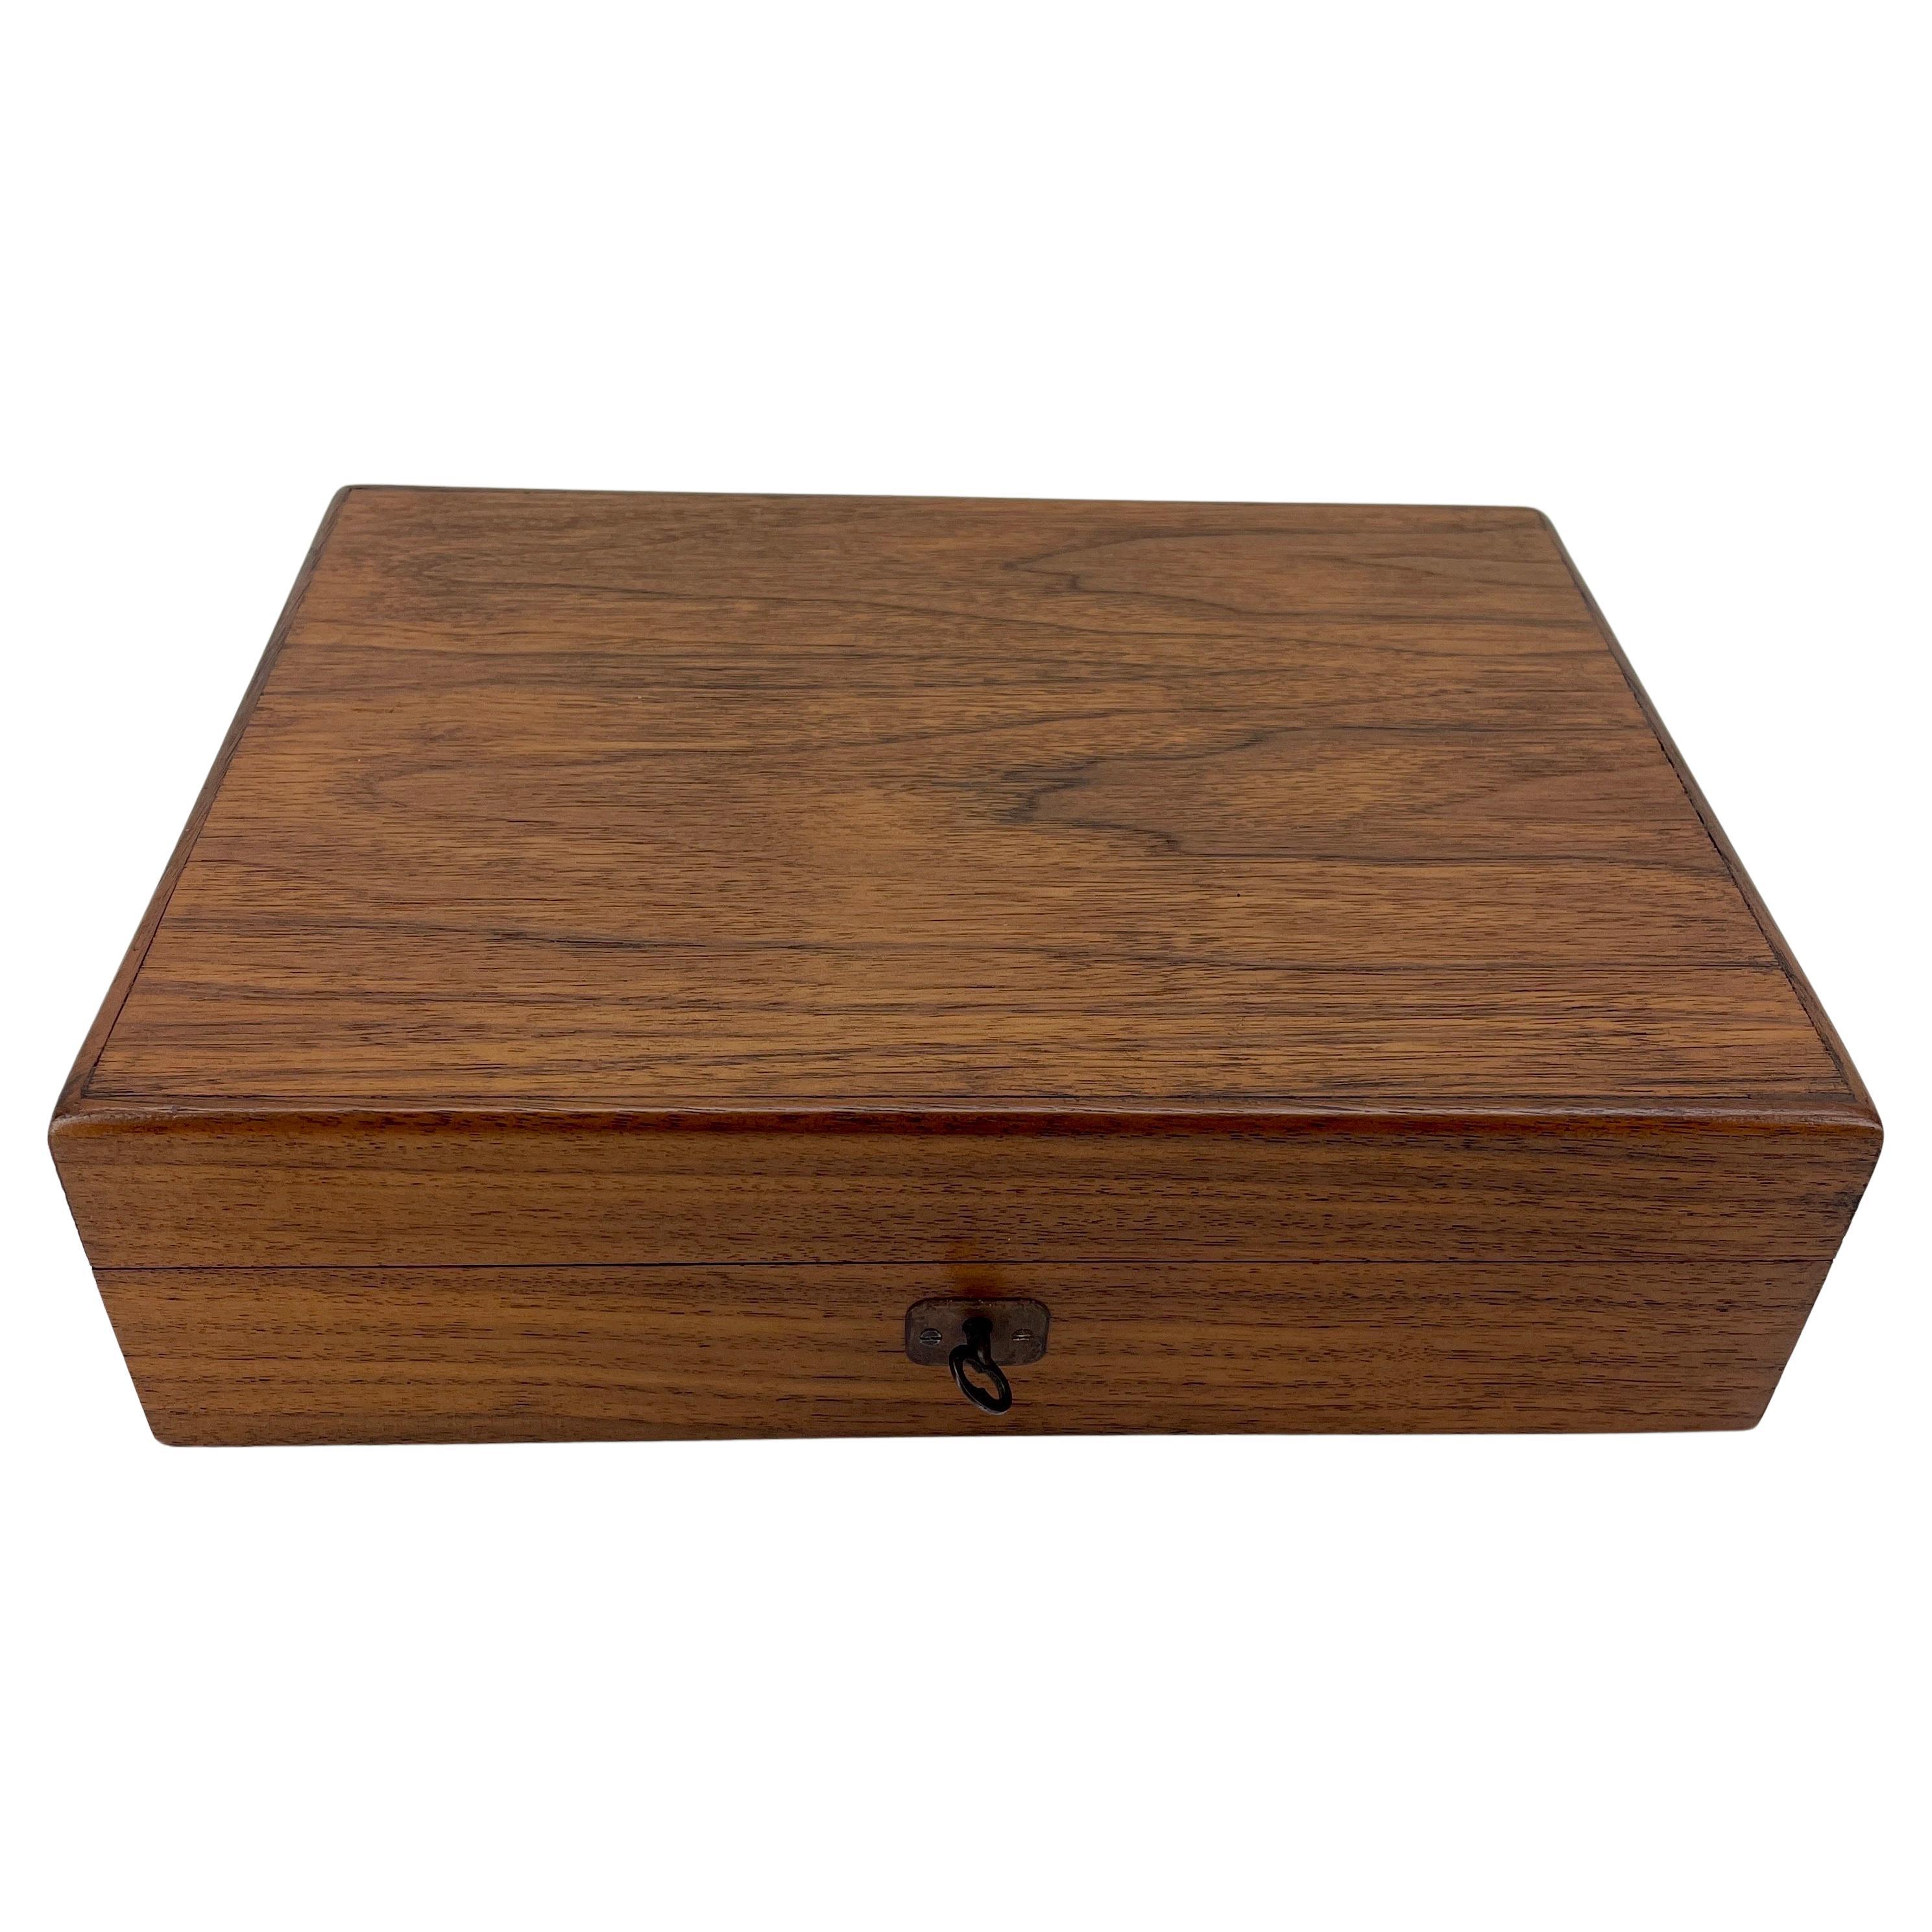 English Rectangular Alfred Dunhill of London Wood Box With Key